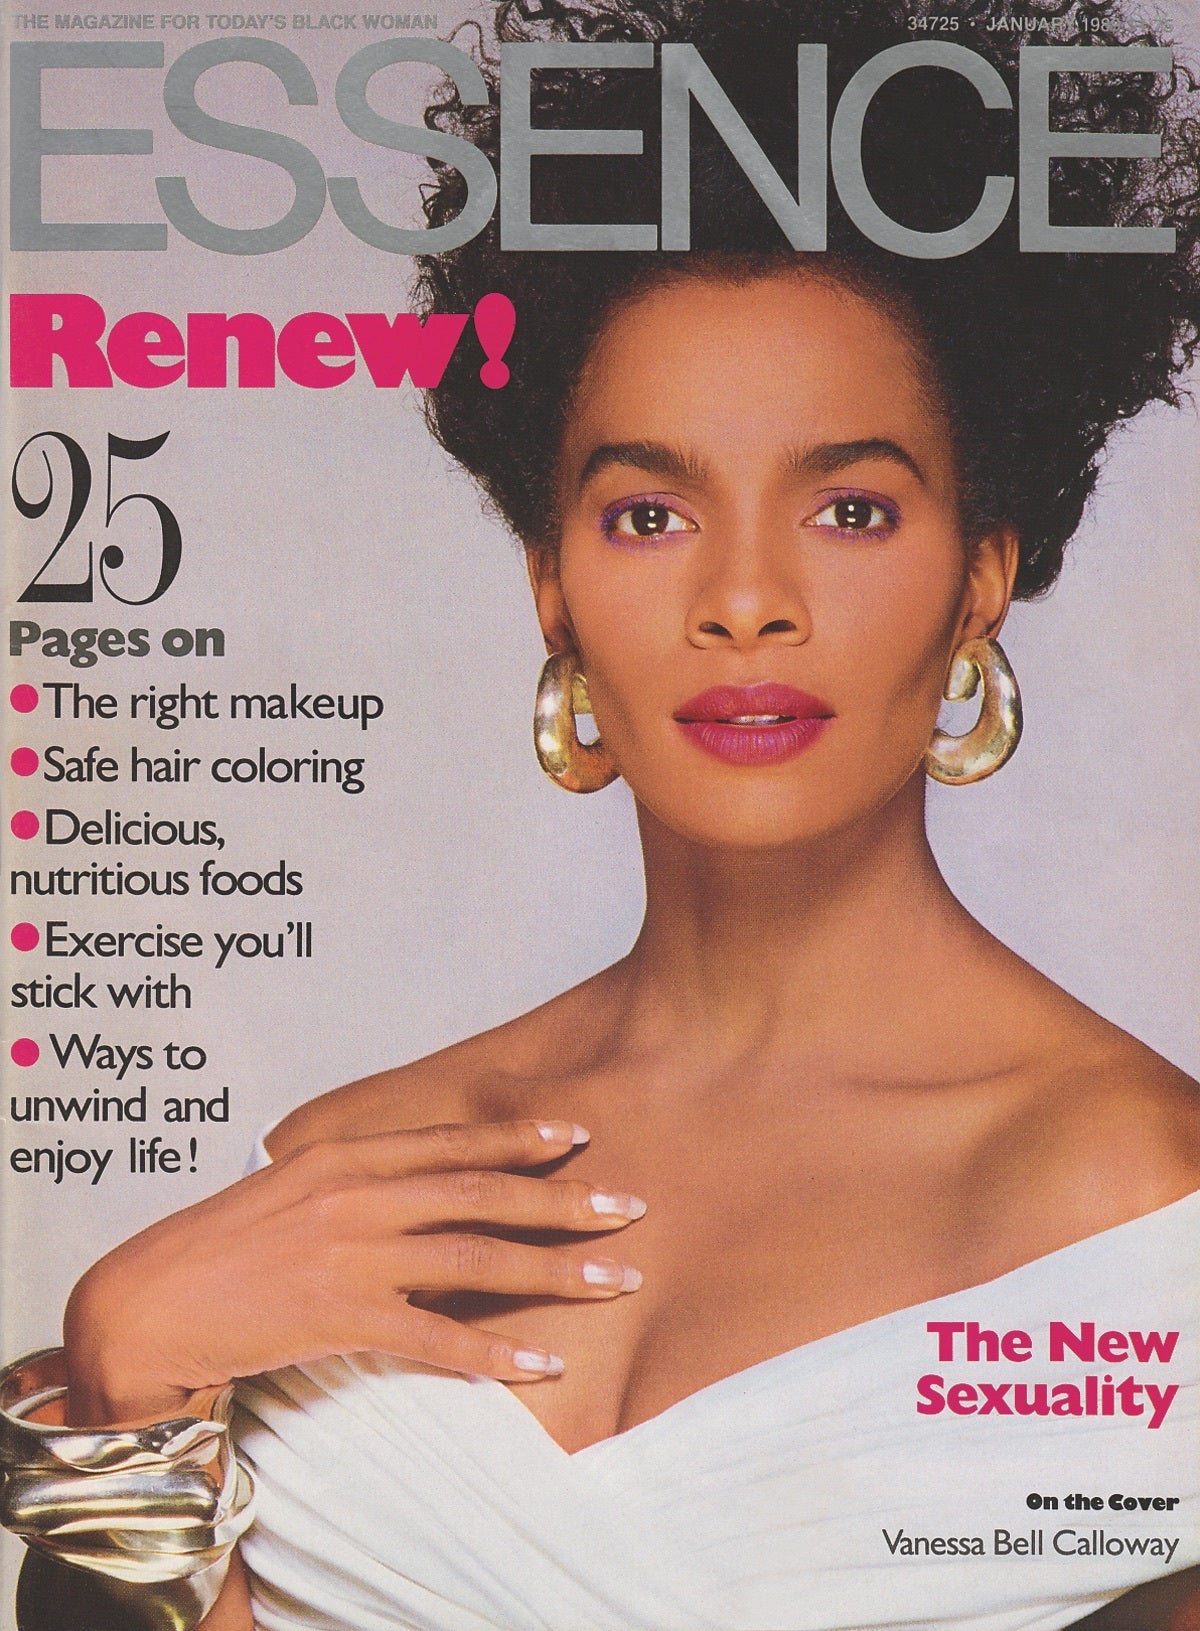 A Look At Members Of The Cast Of 'Coming 2 America' On The Cover Of Essence Over The Years